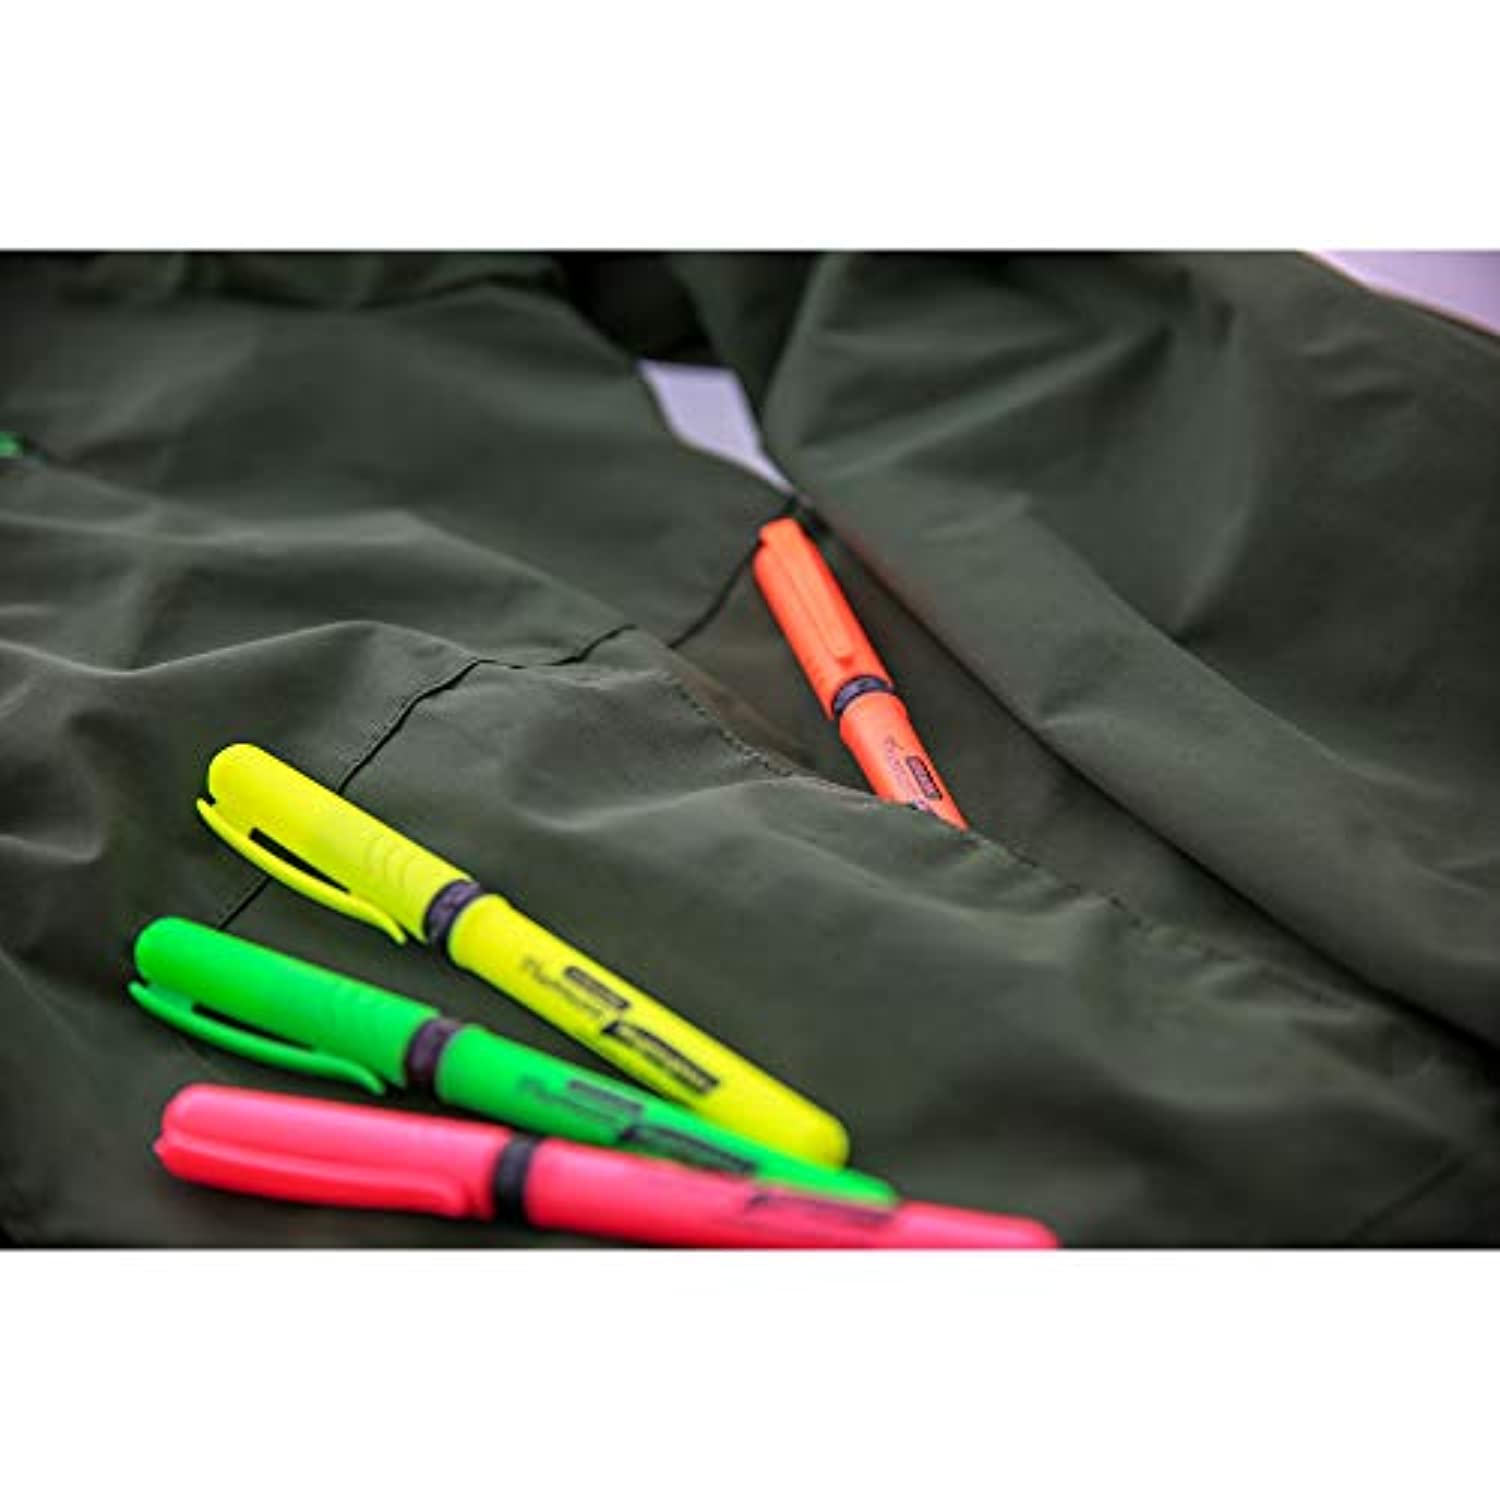 Pen Style Neon Highlighters w/Cushion Grip,Unscented Quick Dry (4/Pack)